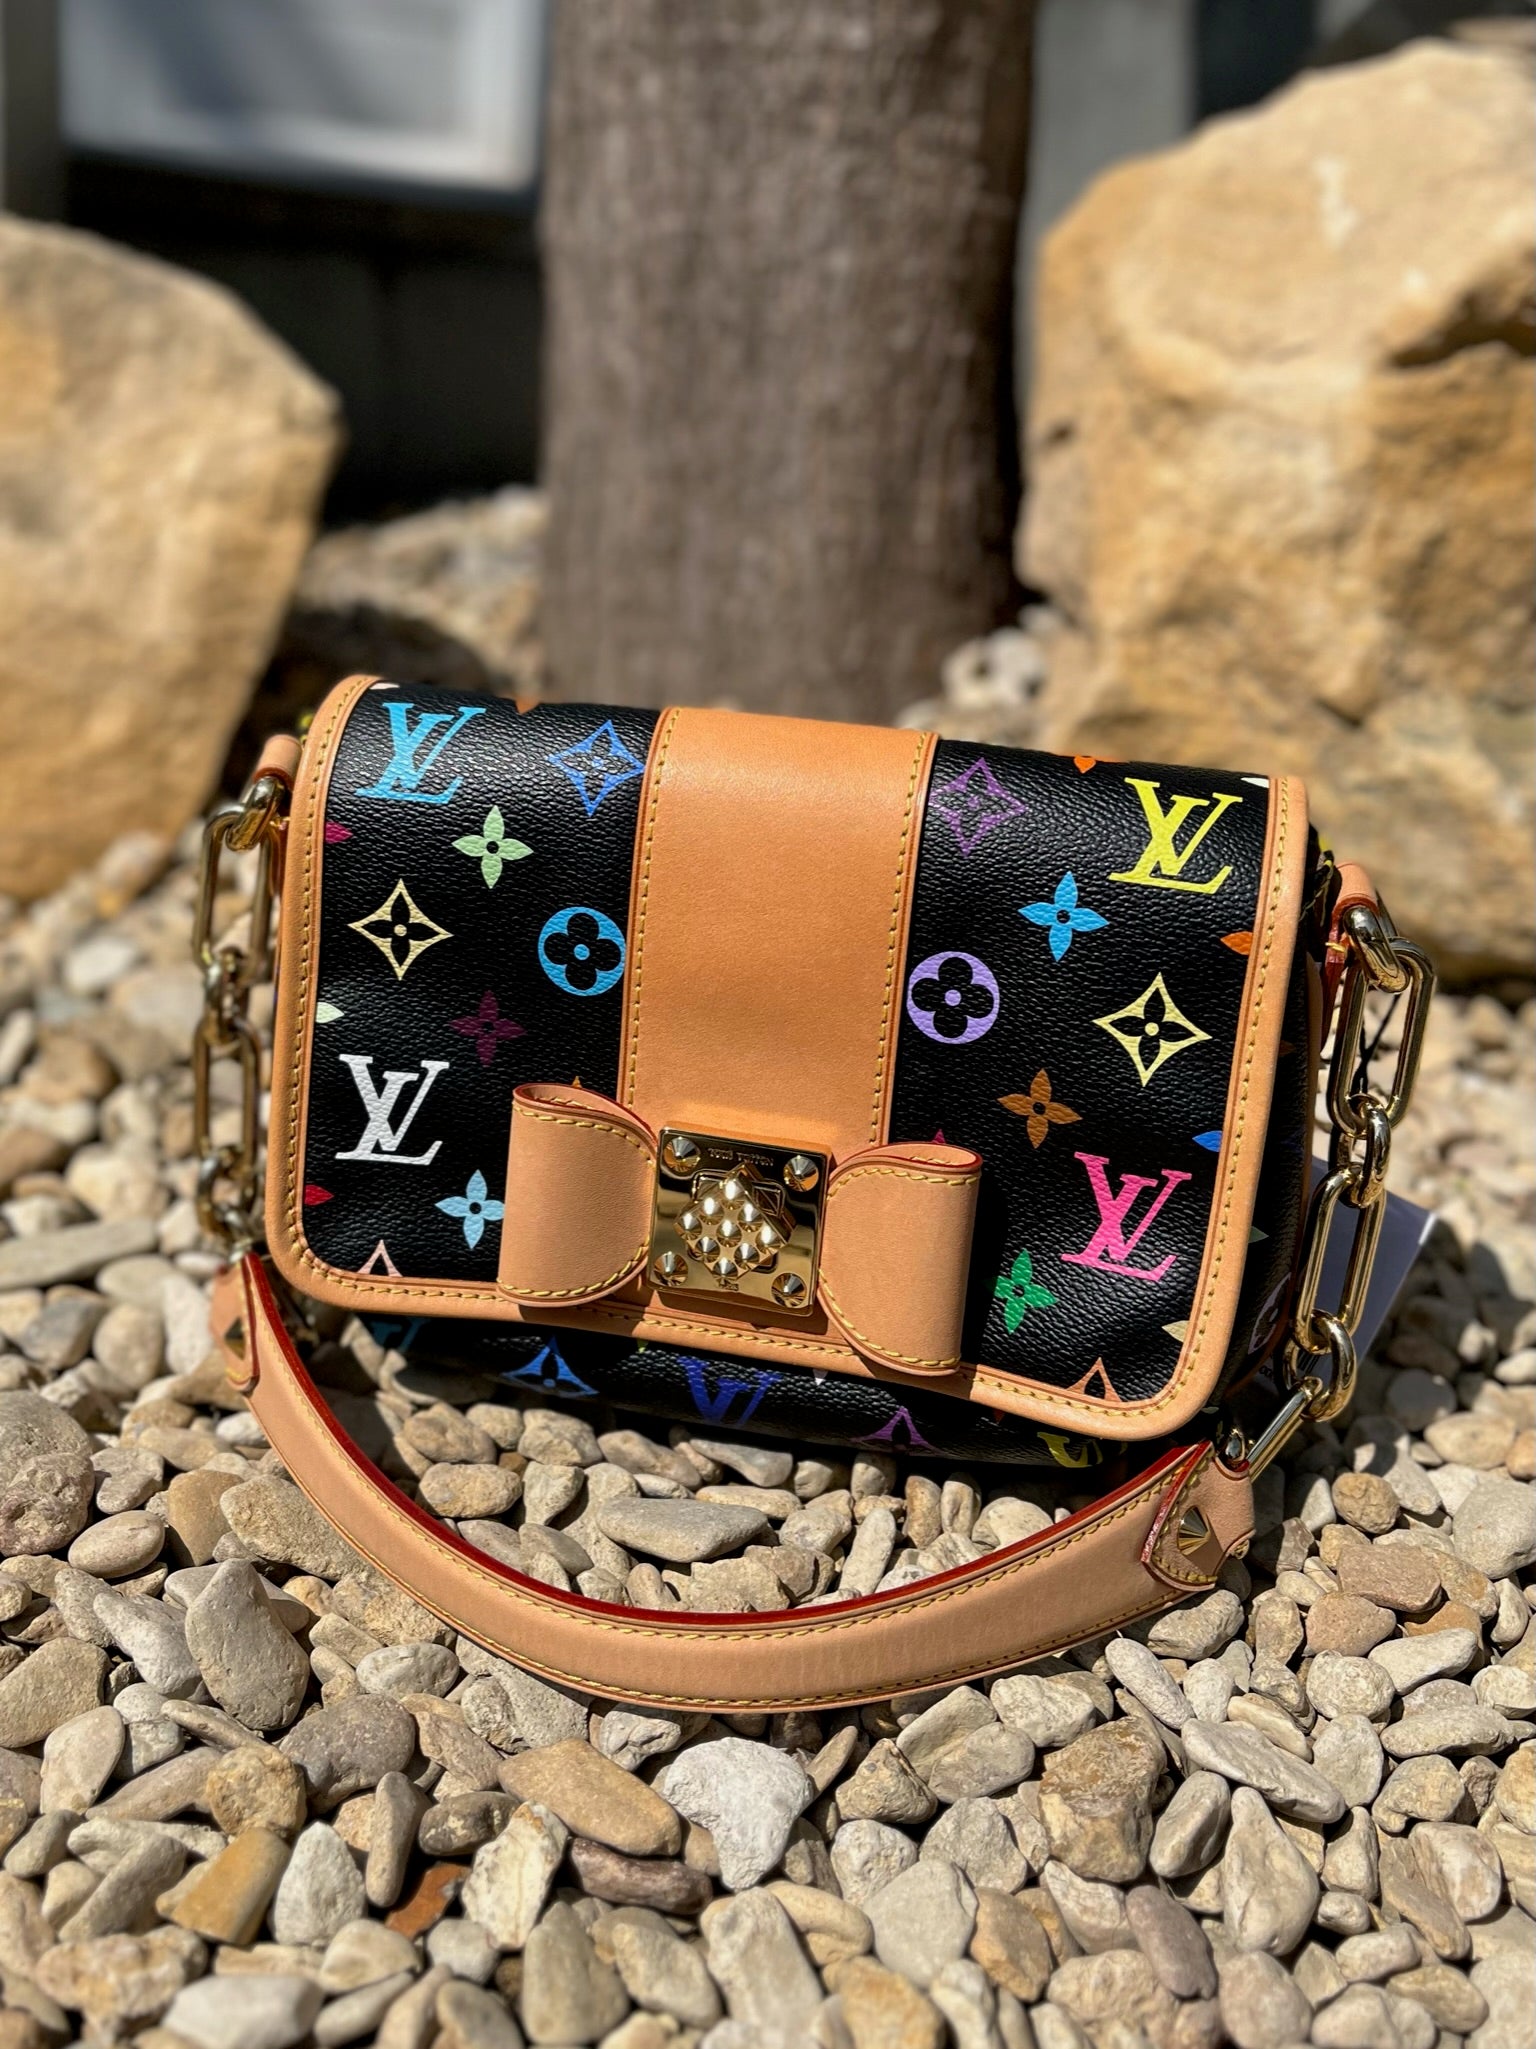 Does anyone know anything about this Louis Vuitton X Takashi